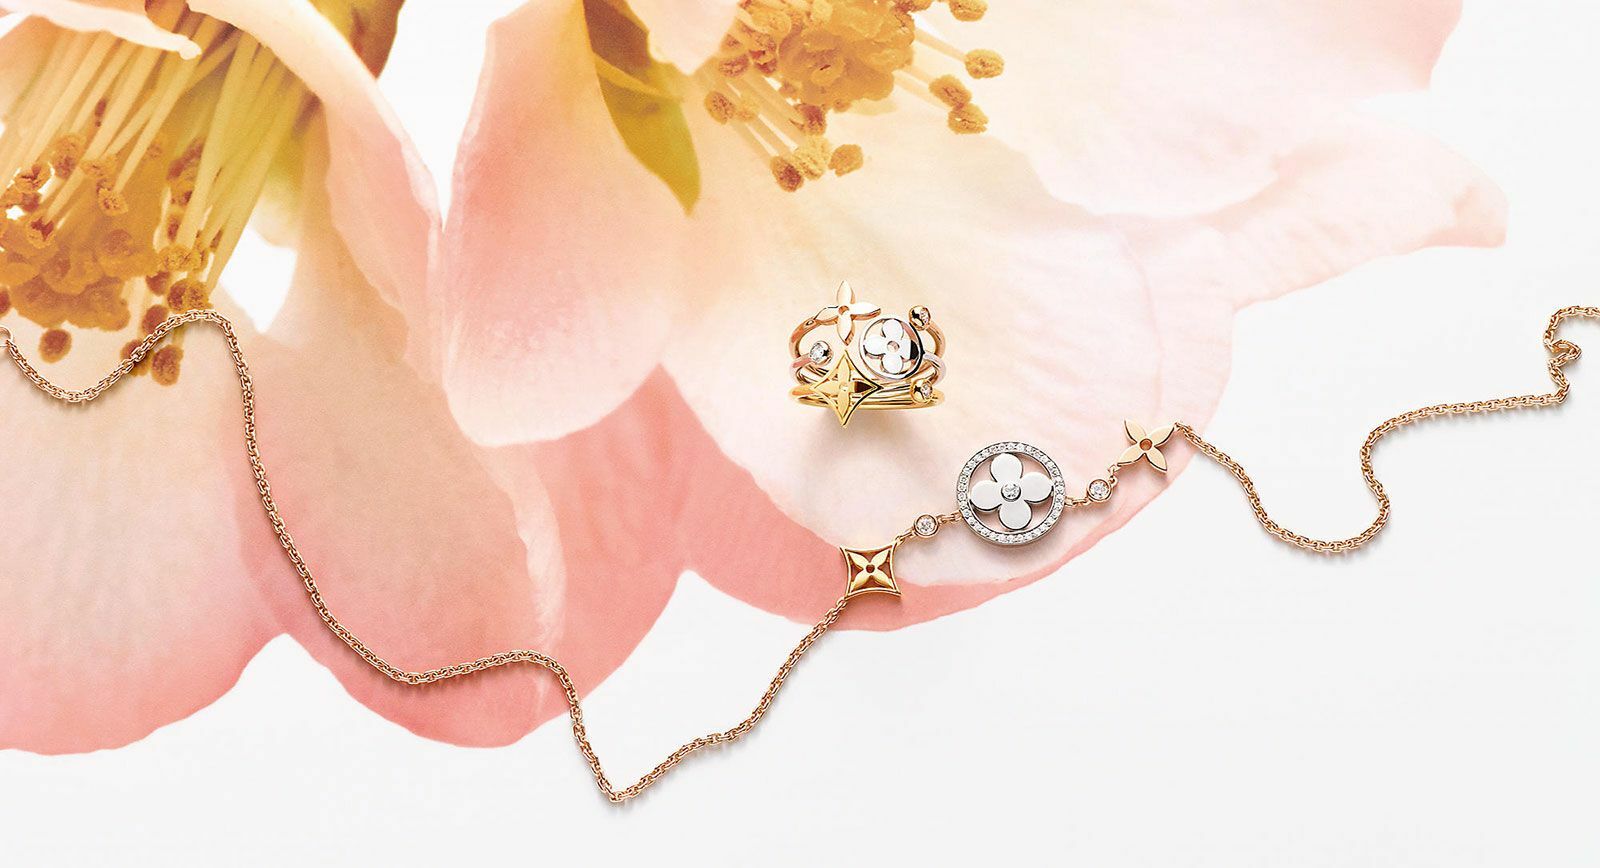 The Monogram Flower Opens Its Petals in the New Louis Vuitton Blossom Collection